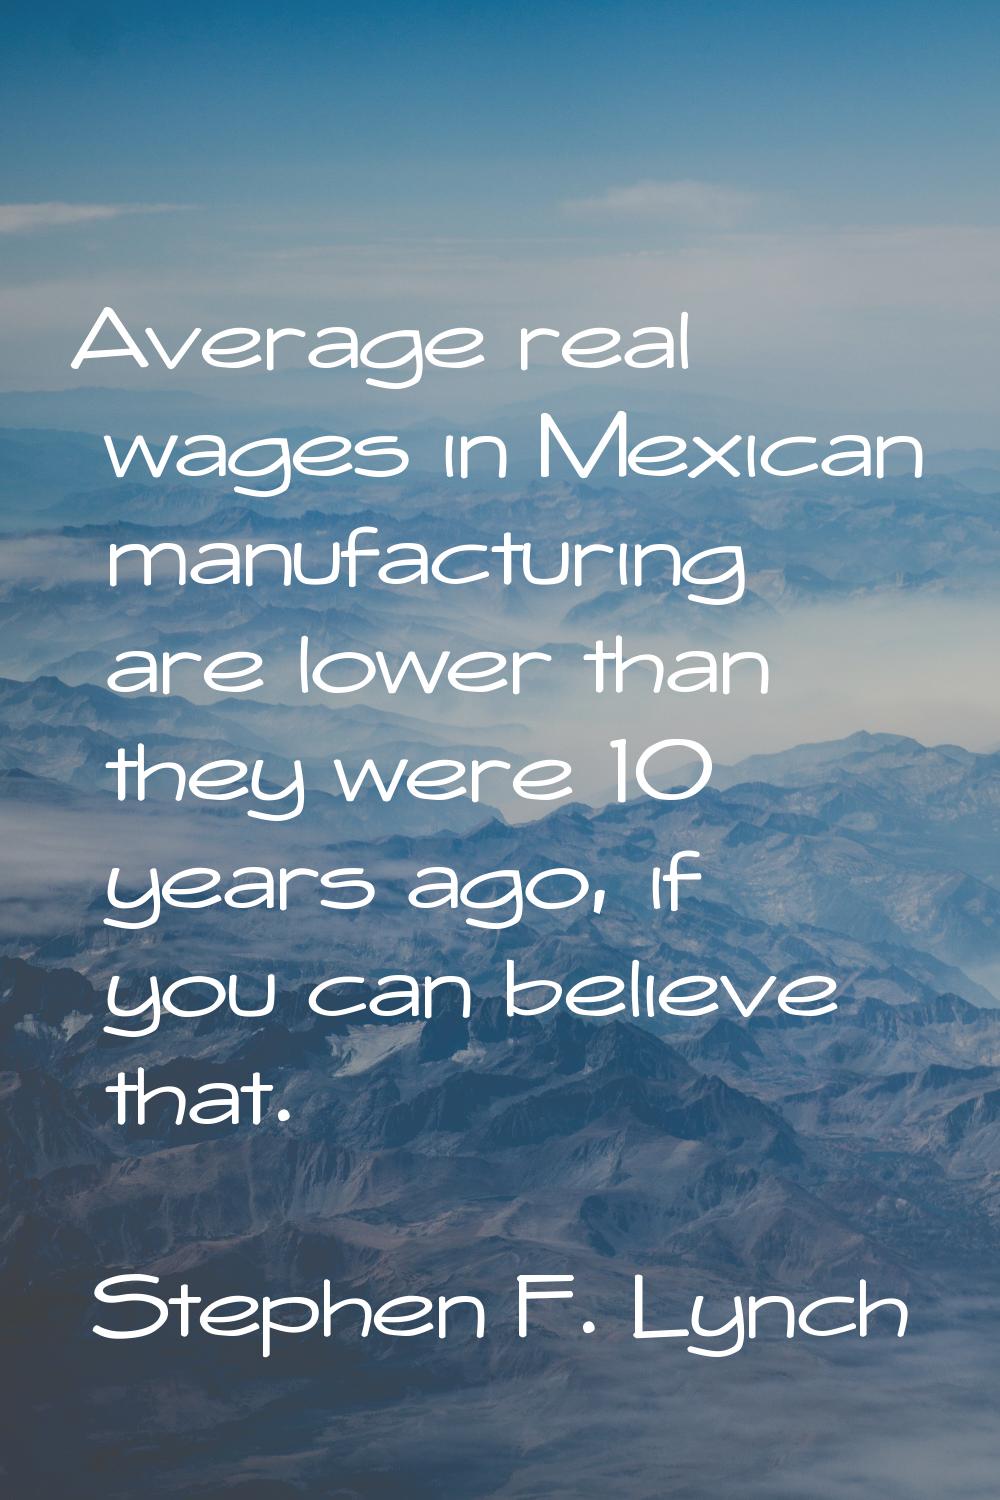 Average real wages in Mexican manufacturing are lower than they were 10 years ago, if you can belie